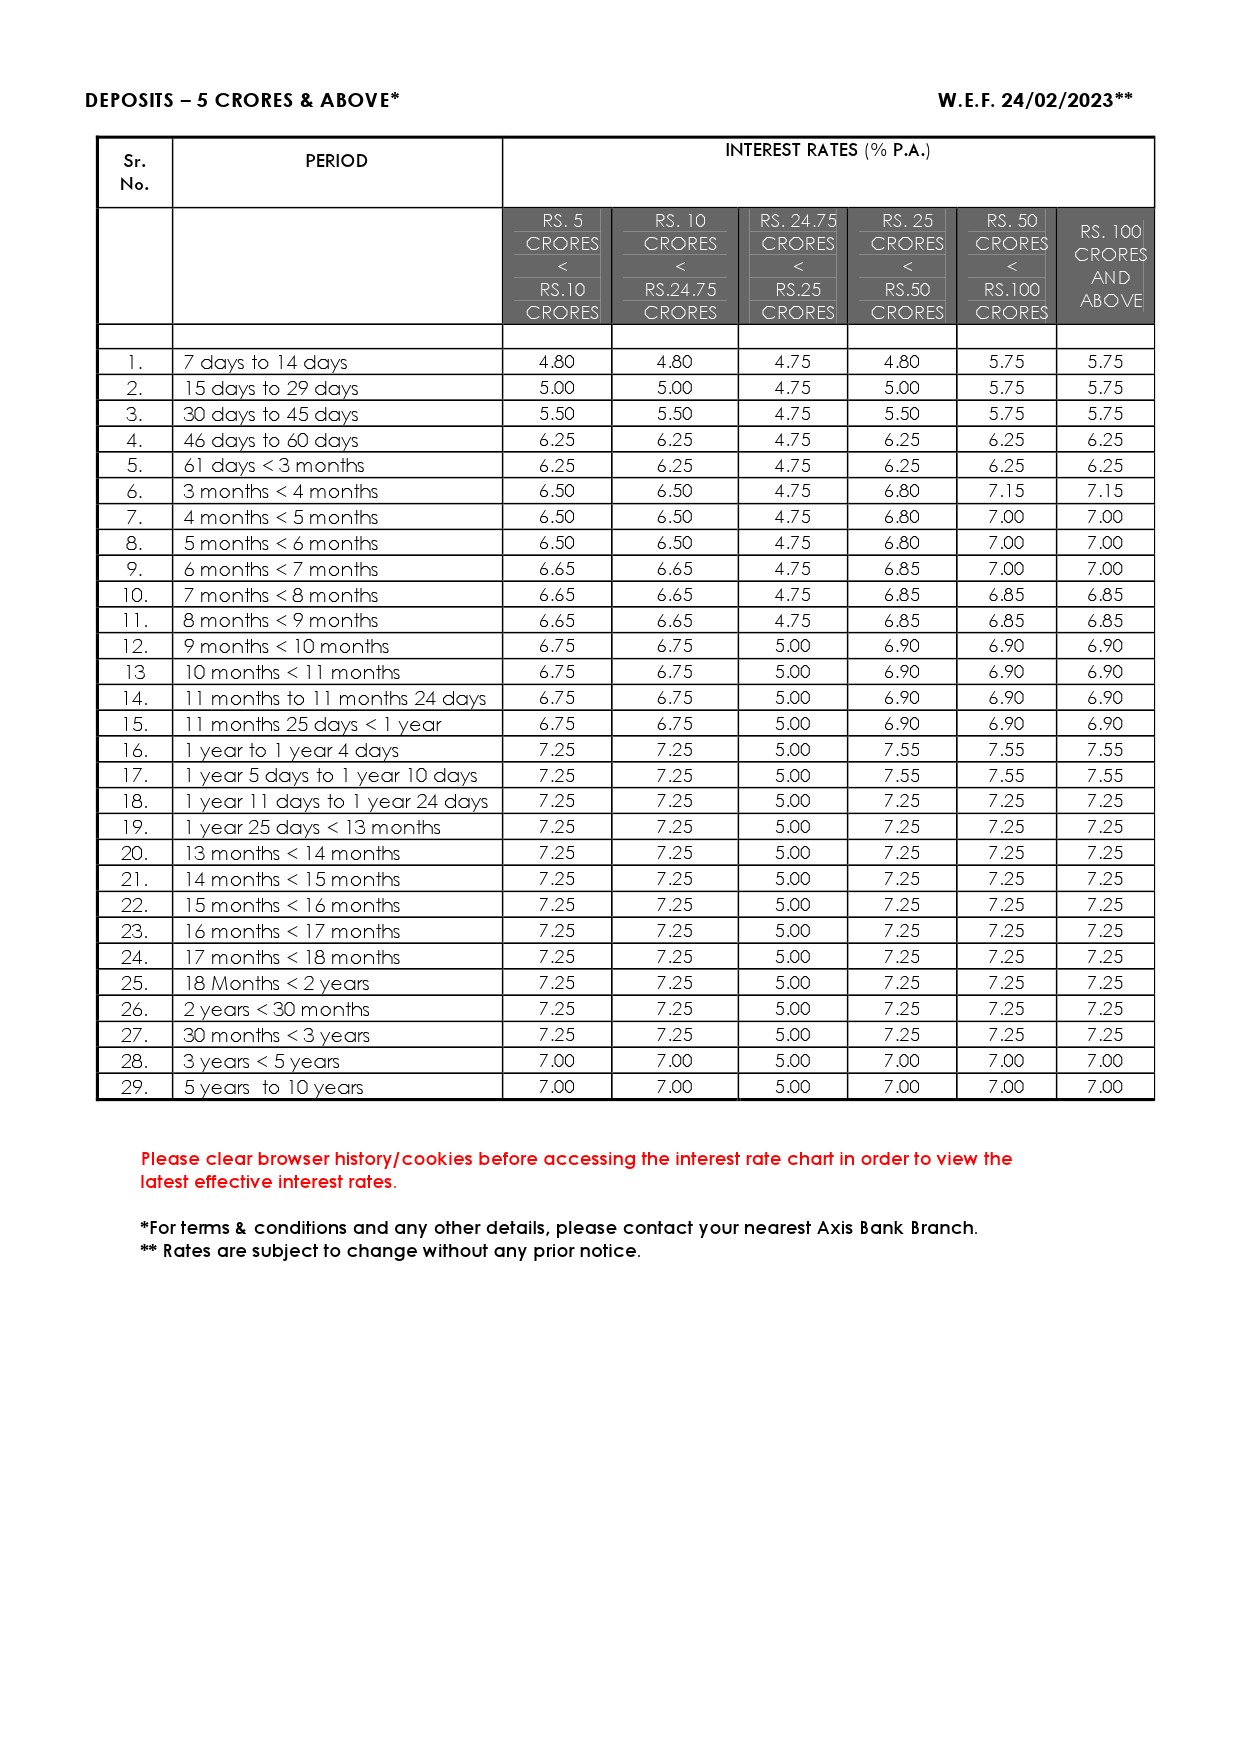 Fixed Deposit Interest Rates of Axis Bank Ltd - Image 3